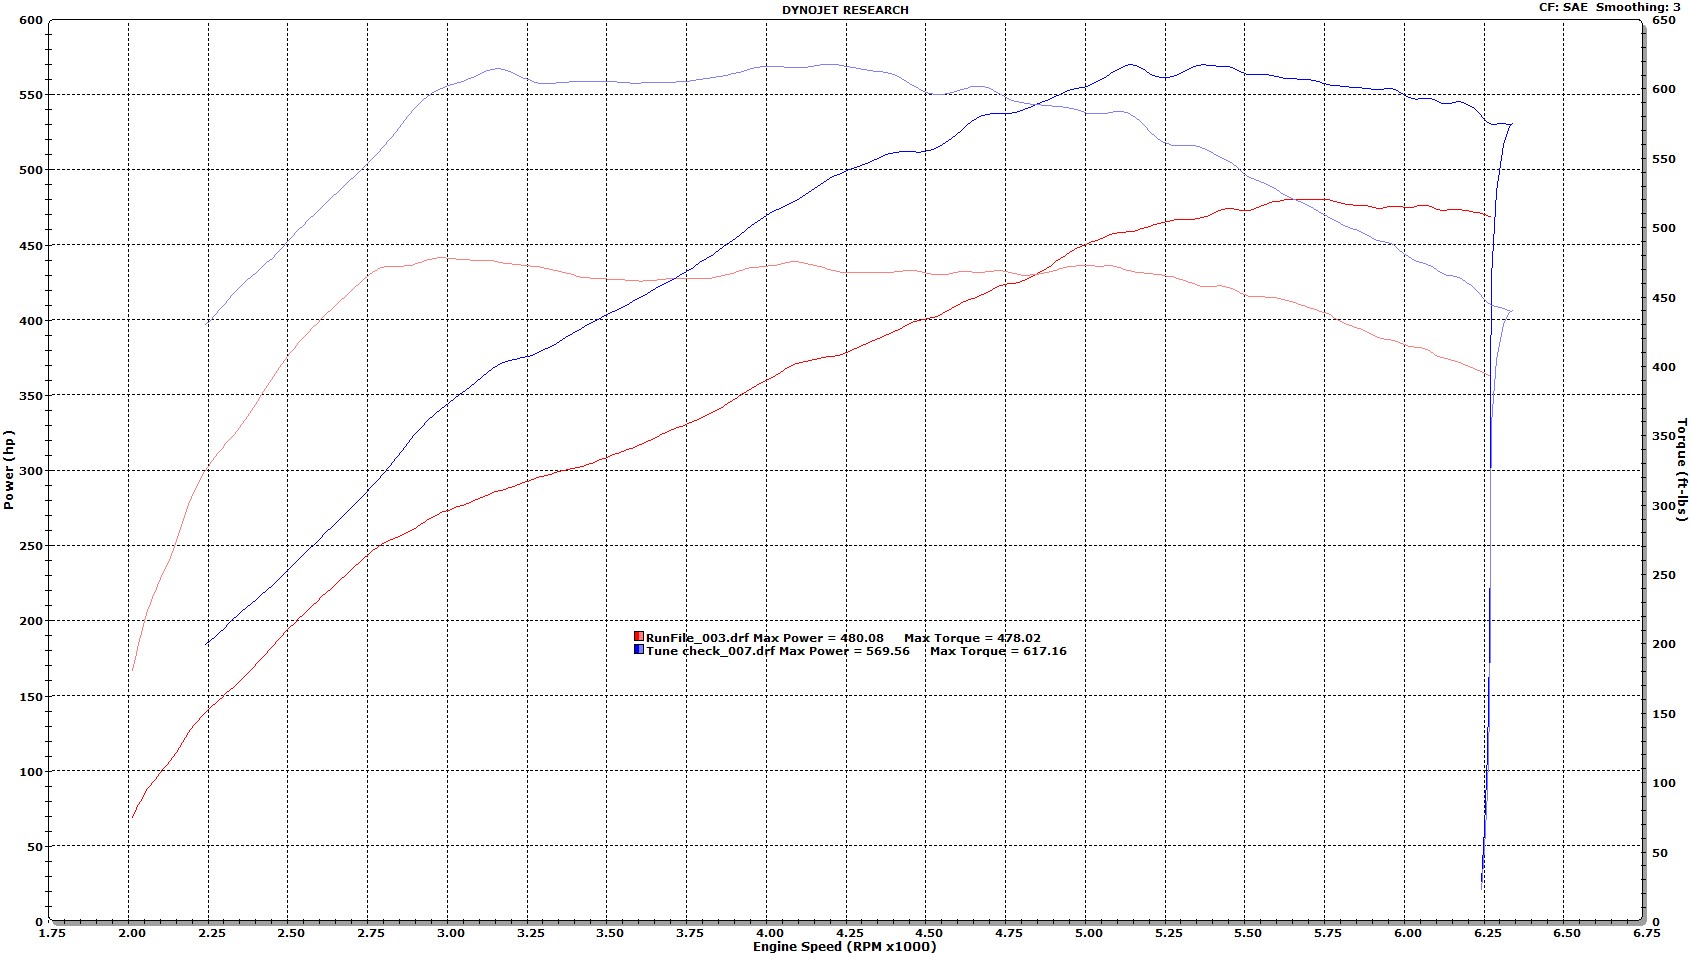 Mercedes-Benz CLS63 AMG Dyno Graph Results